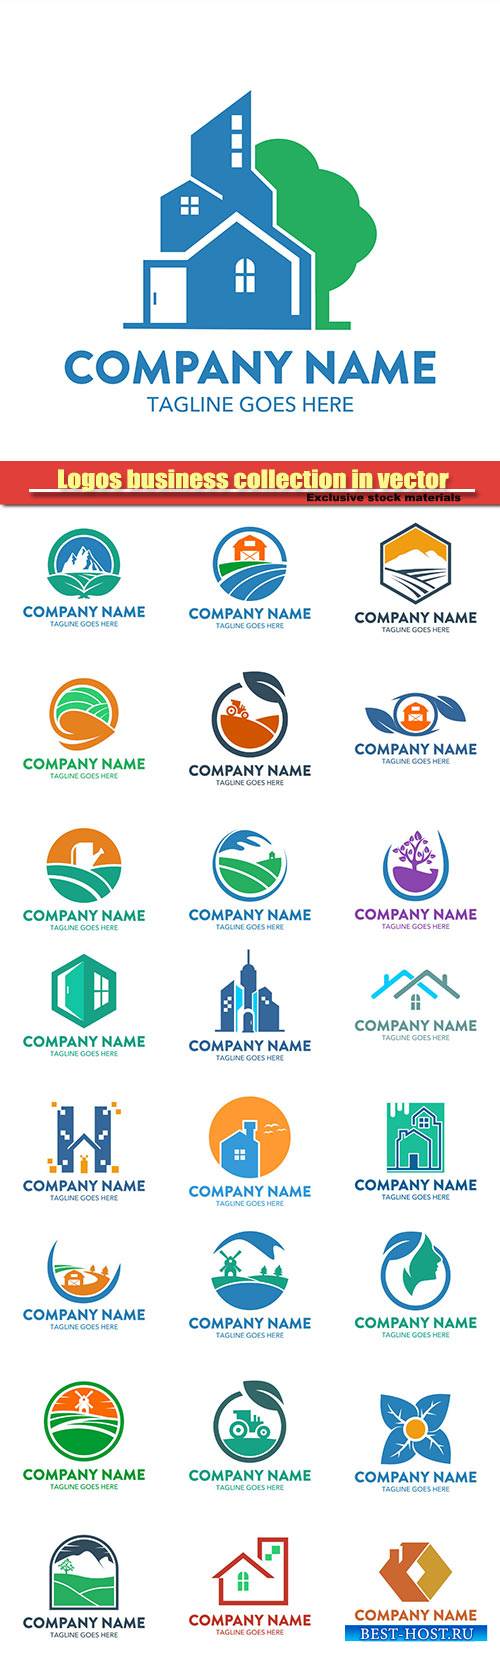 Logos business collection in vector #28